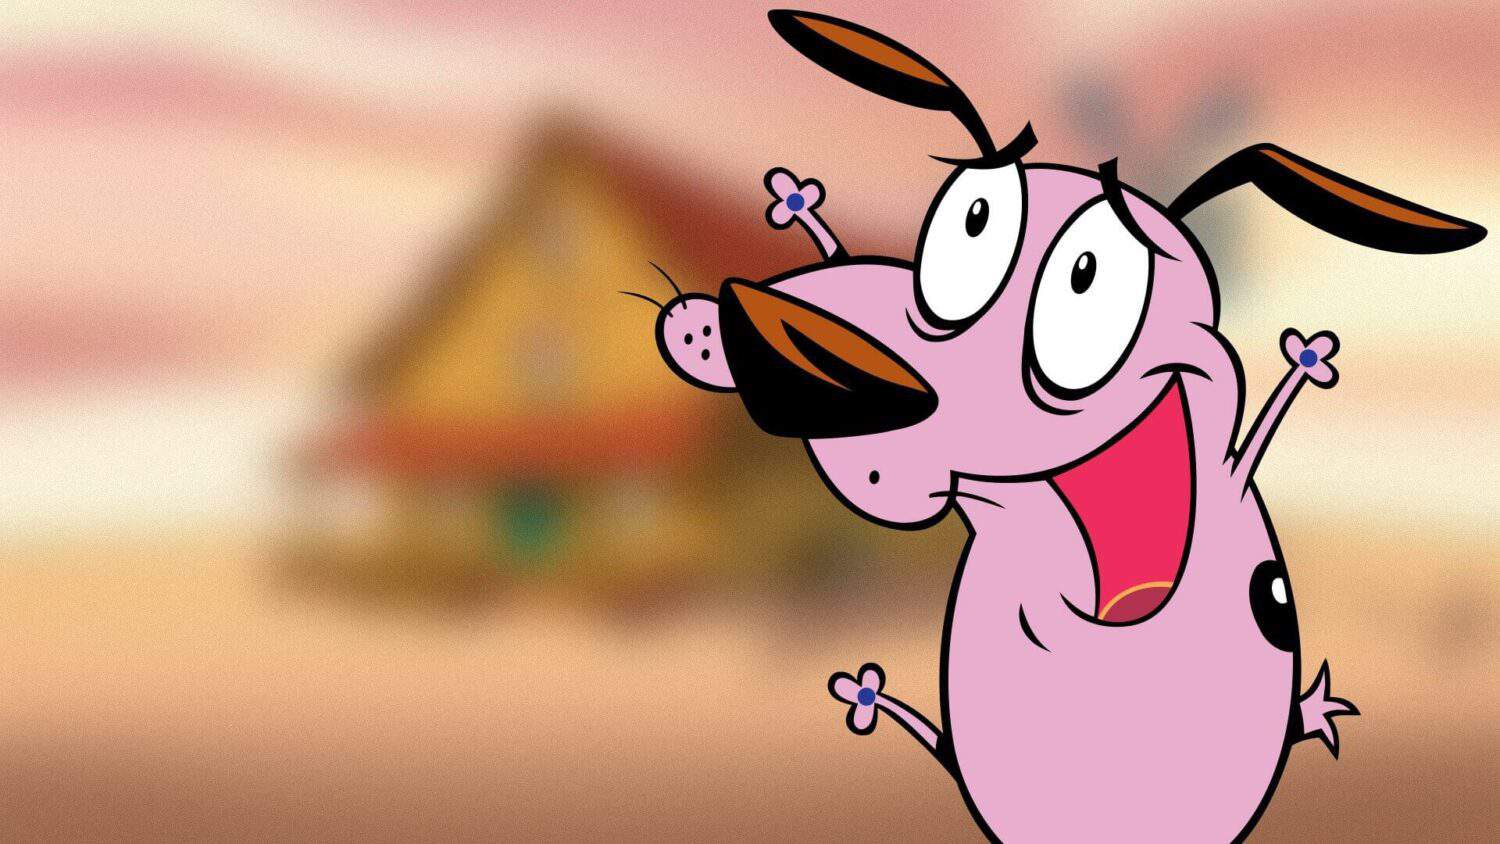 Courage - Courage the Cowardly Dog